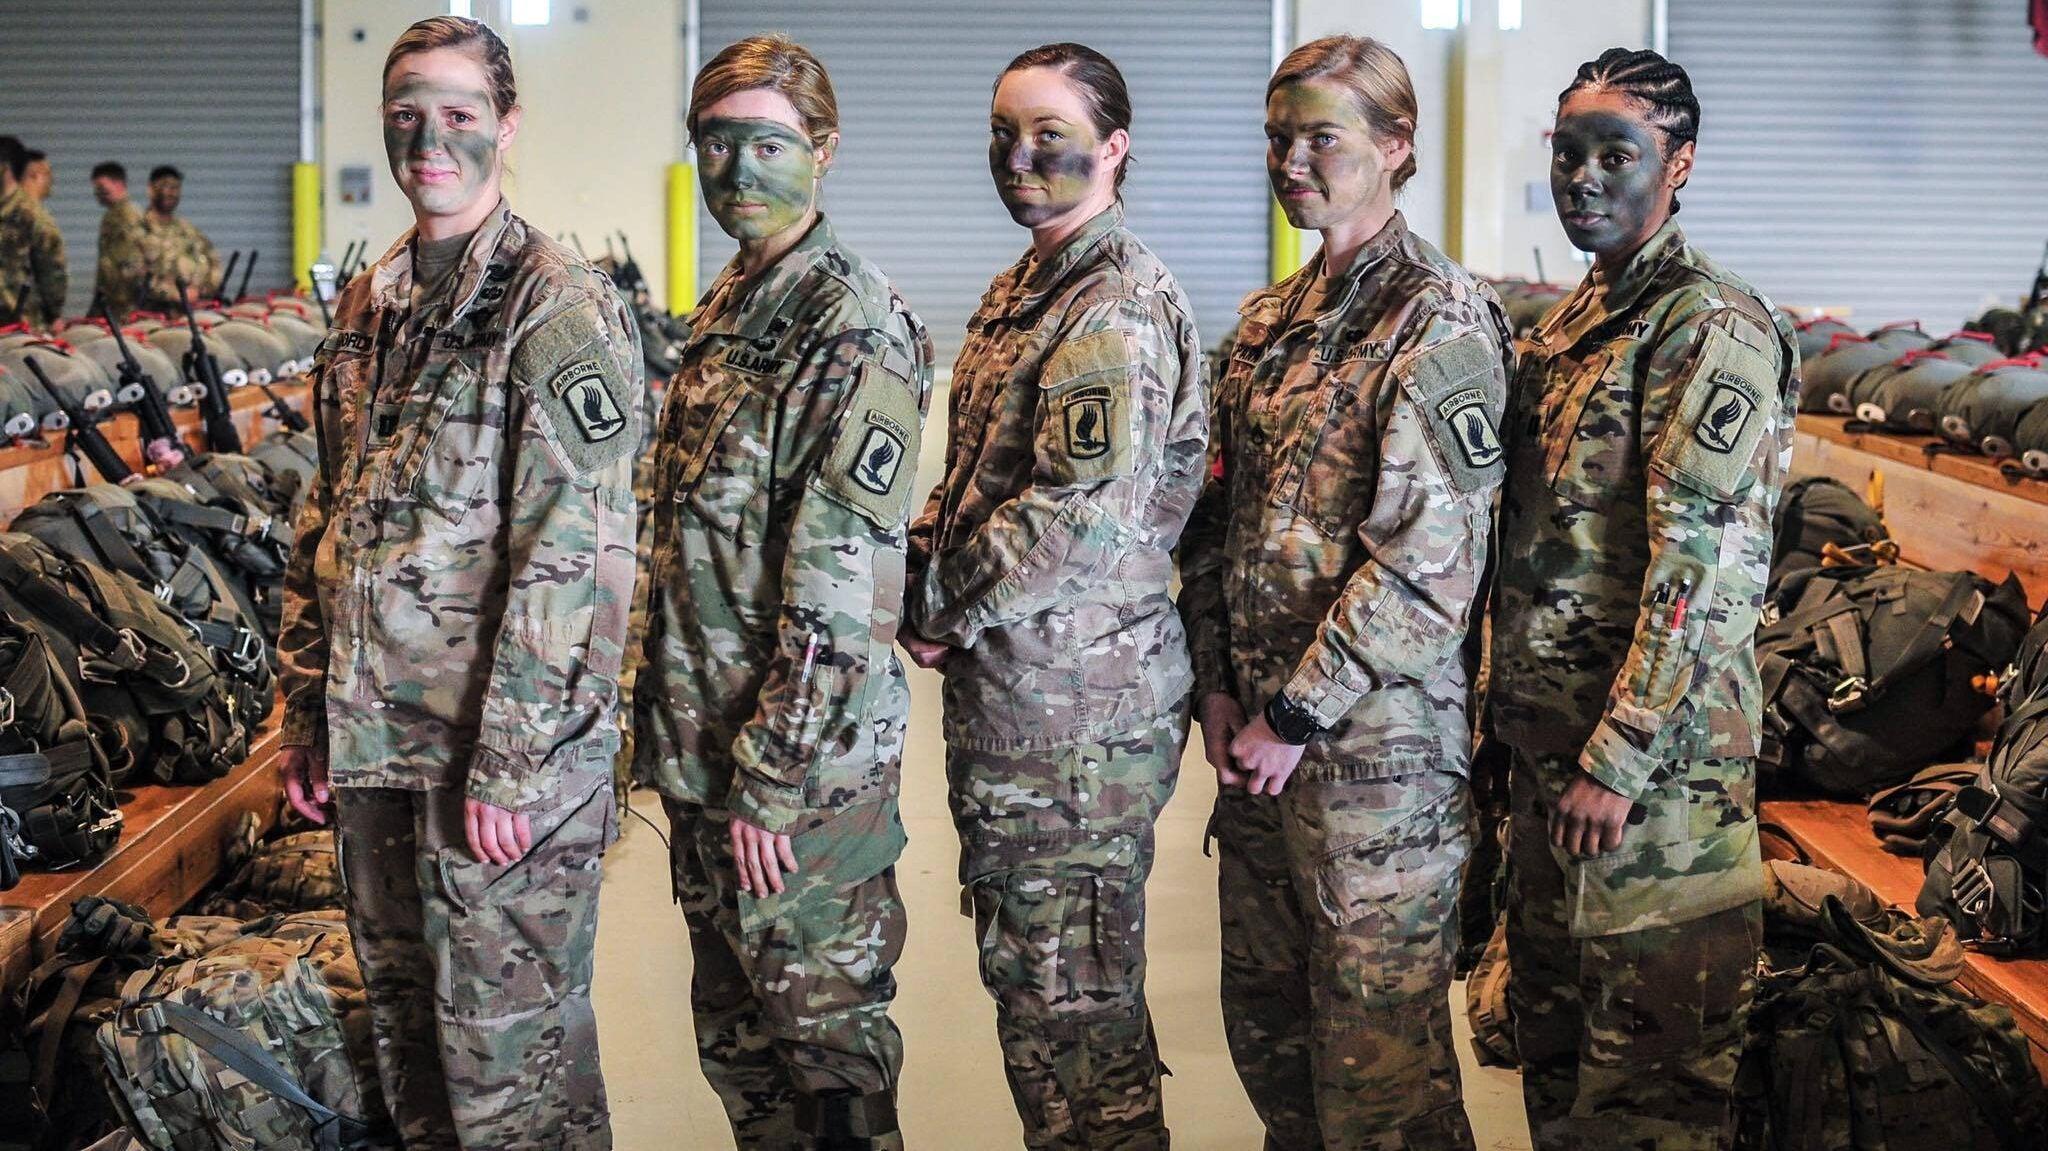 As women were gaining equality in the 80s, the Army put a pause on them